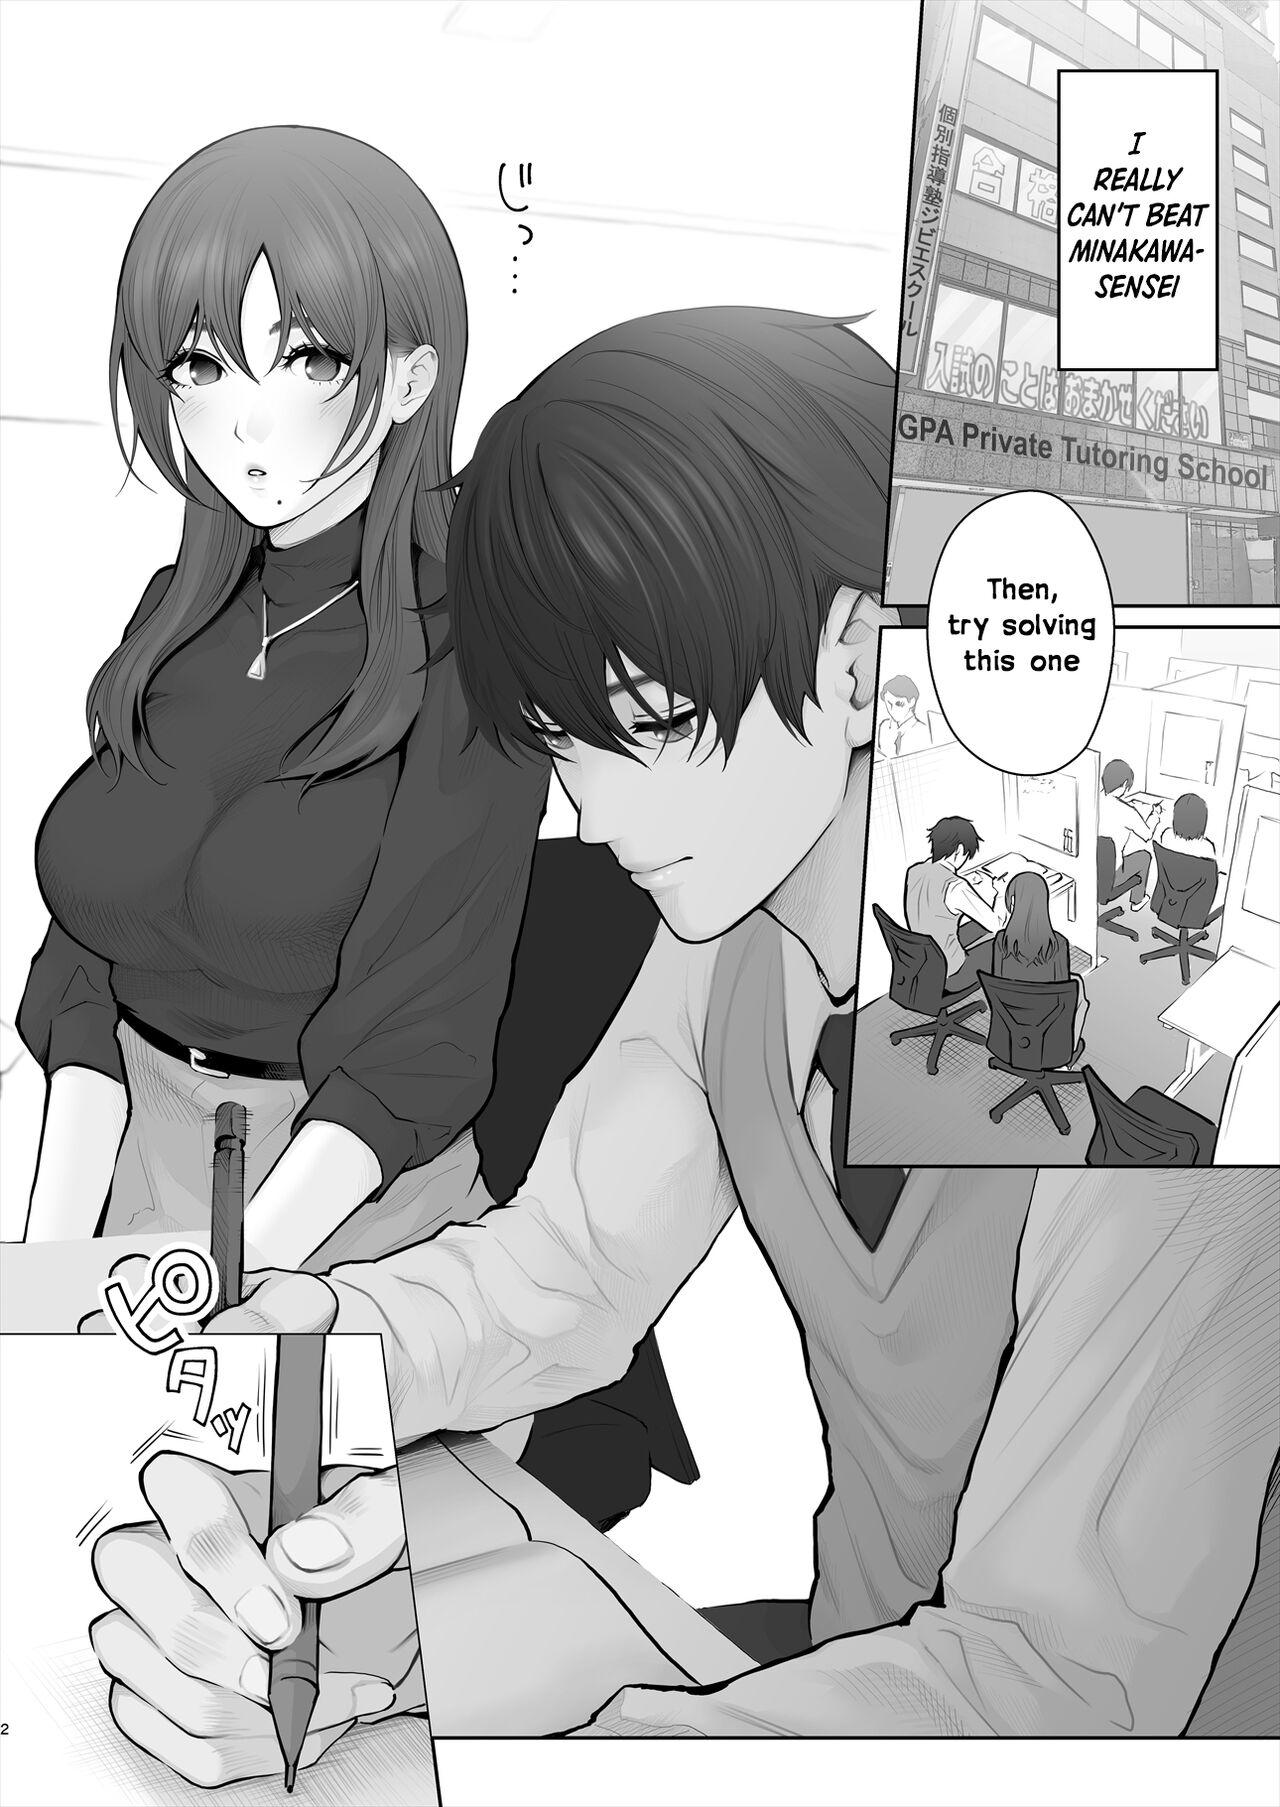 Camgirls Sensei wa Deau Mae Kara Choukyou Sumi | My Teacher Who, Prior to Our Encounter, Has Been Leashed In - Original Uncensored - Page 3